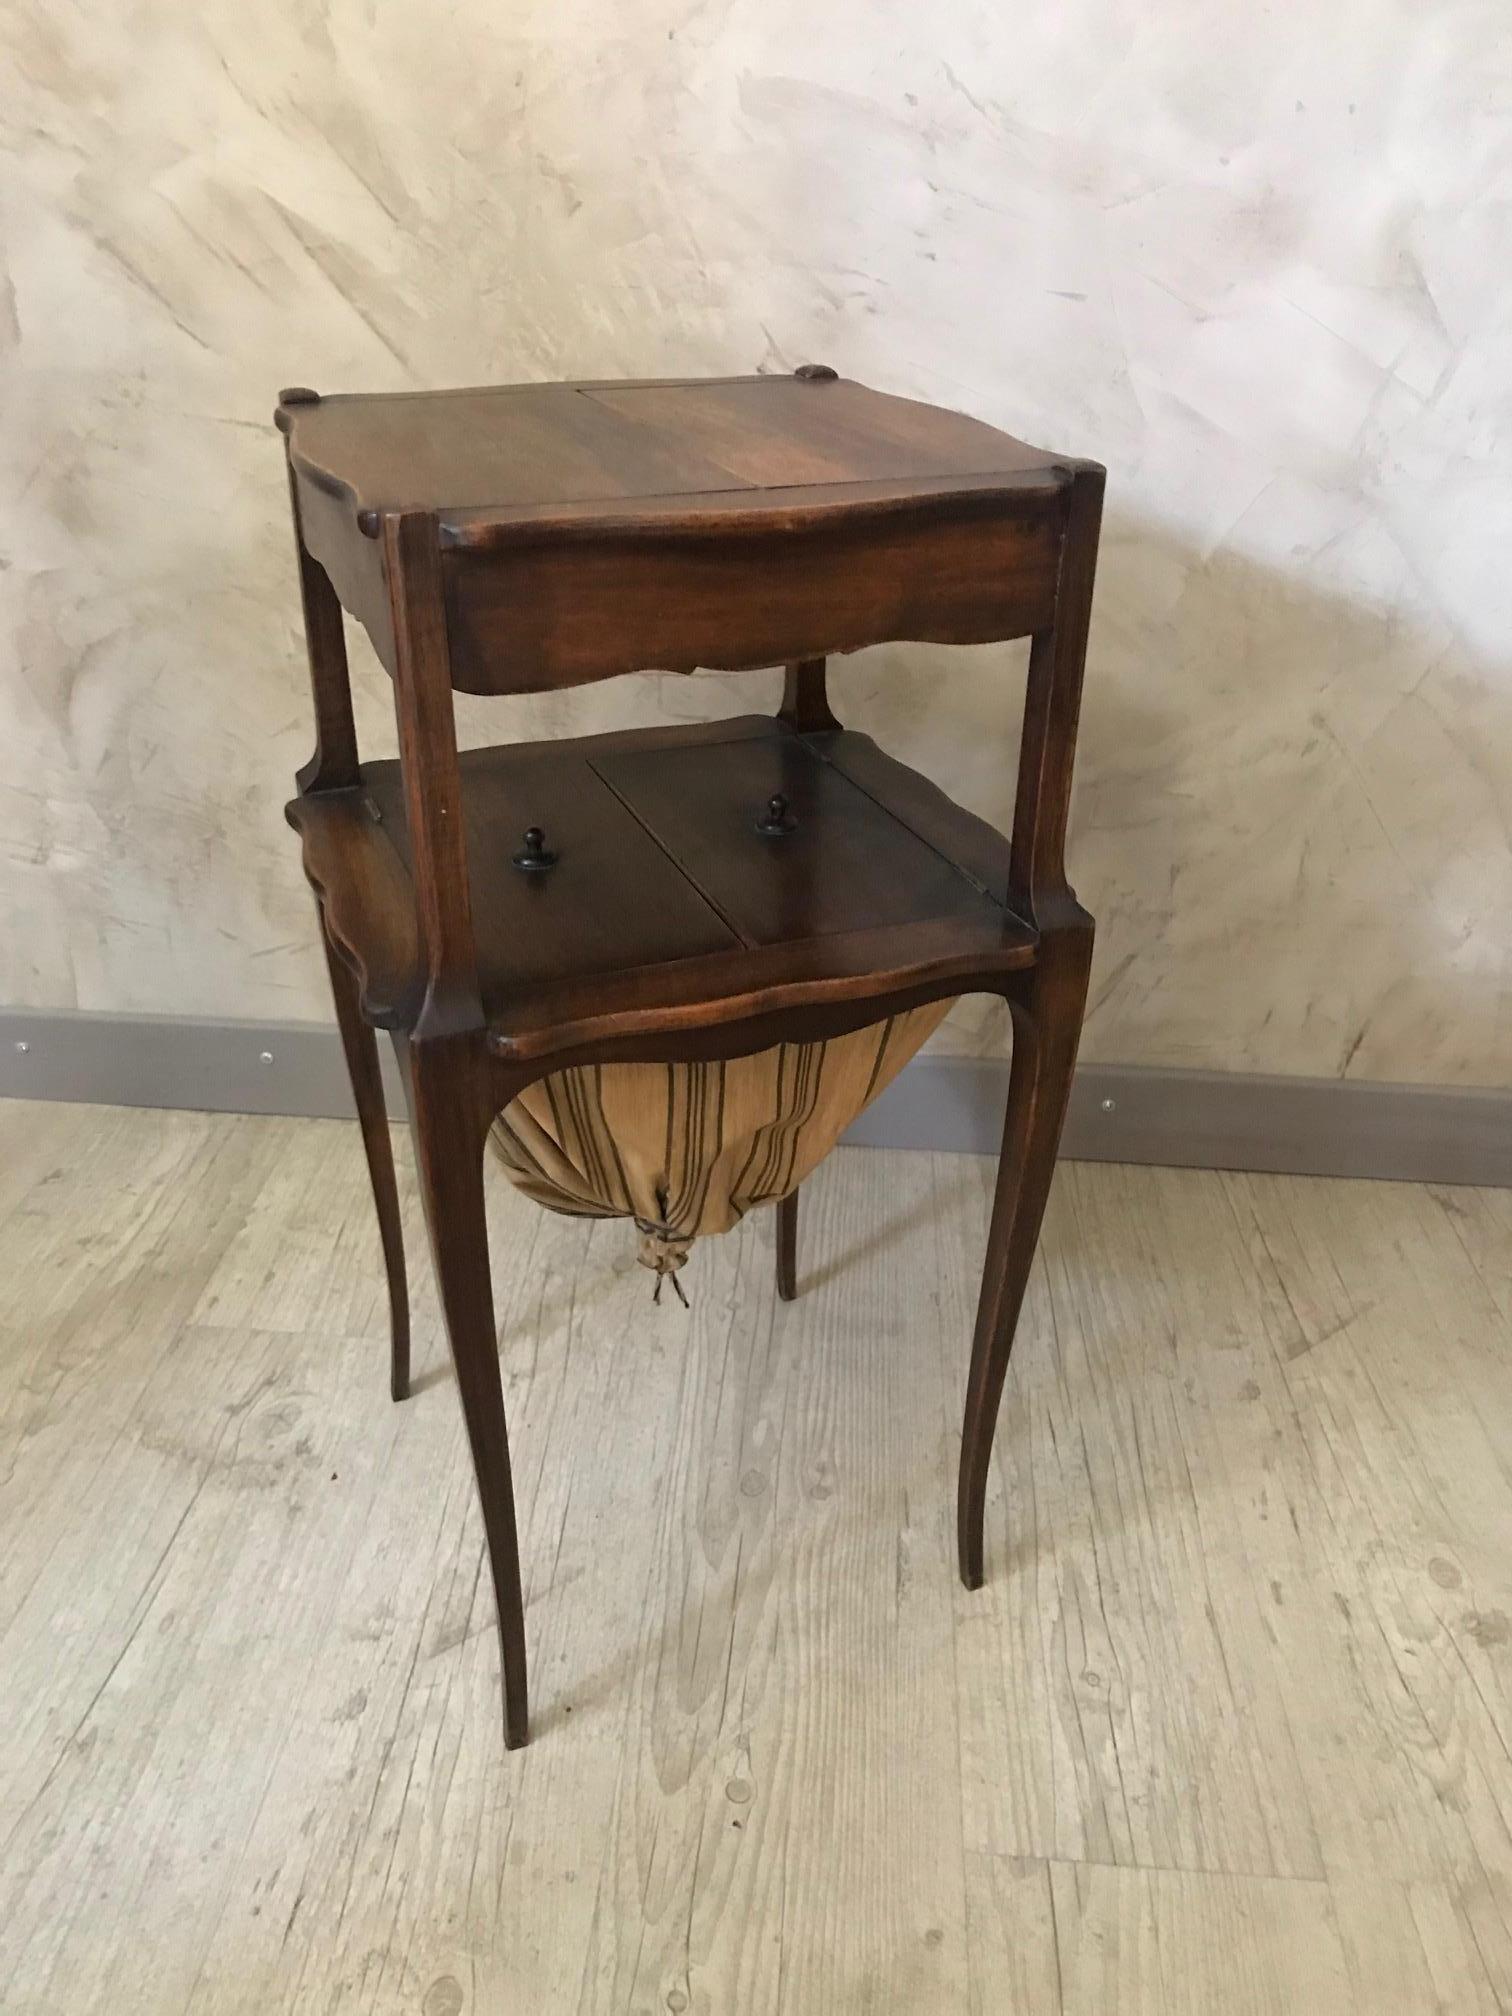 Very nice 20th century French walnut sewing table from the 1920s.
Opening on the top to show multiple storage compartment. Also opening on the bottom to put all the sewing things in the fabric compartment.
Nice quality and condition.